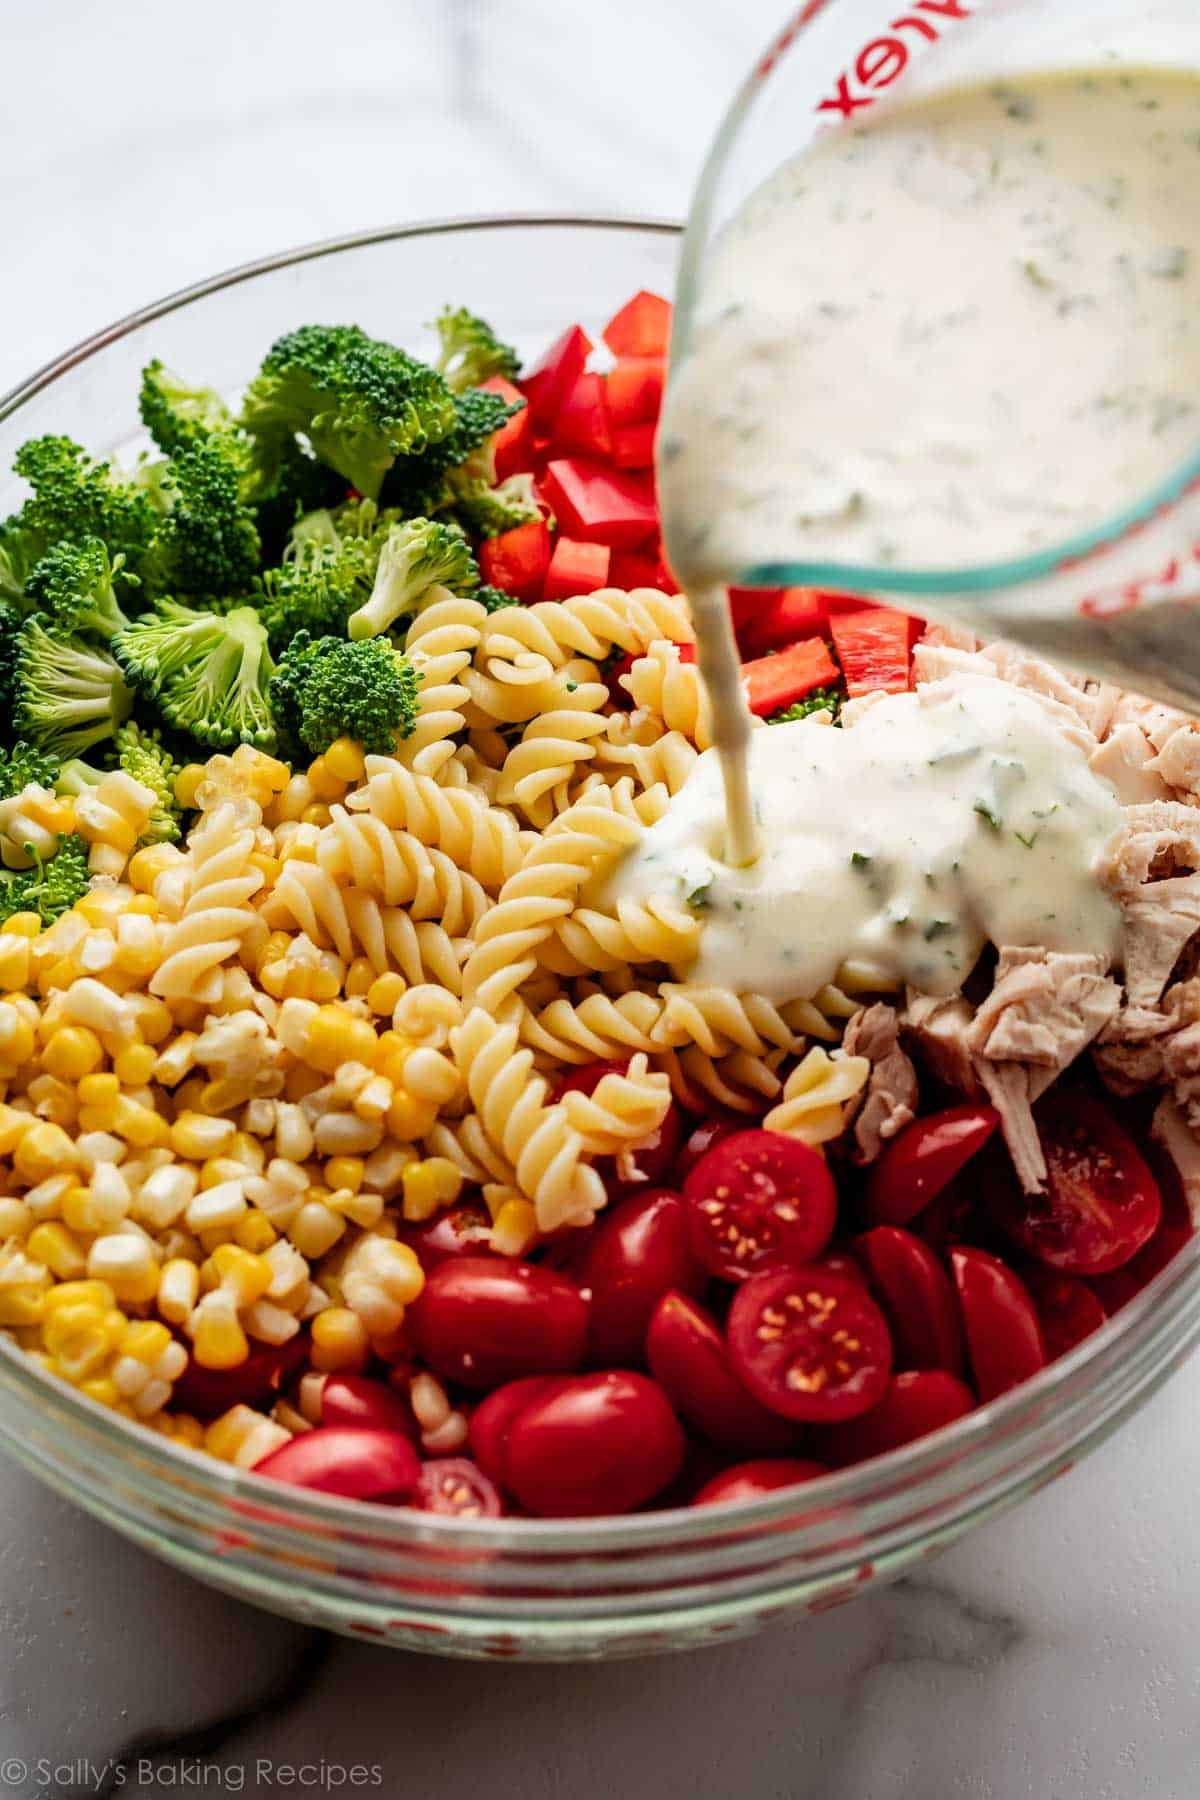 pouring creamy dressing on bowl of pasta, tomatoes, corn, and broccoli.